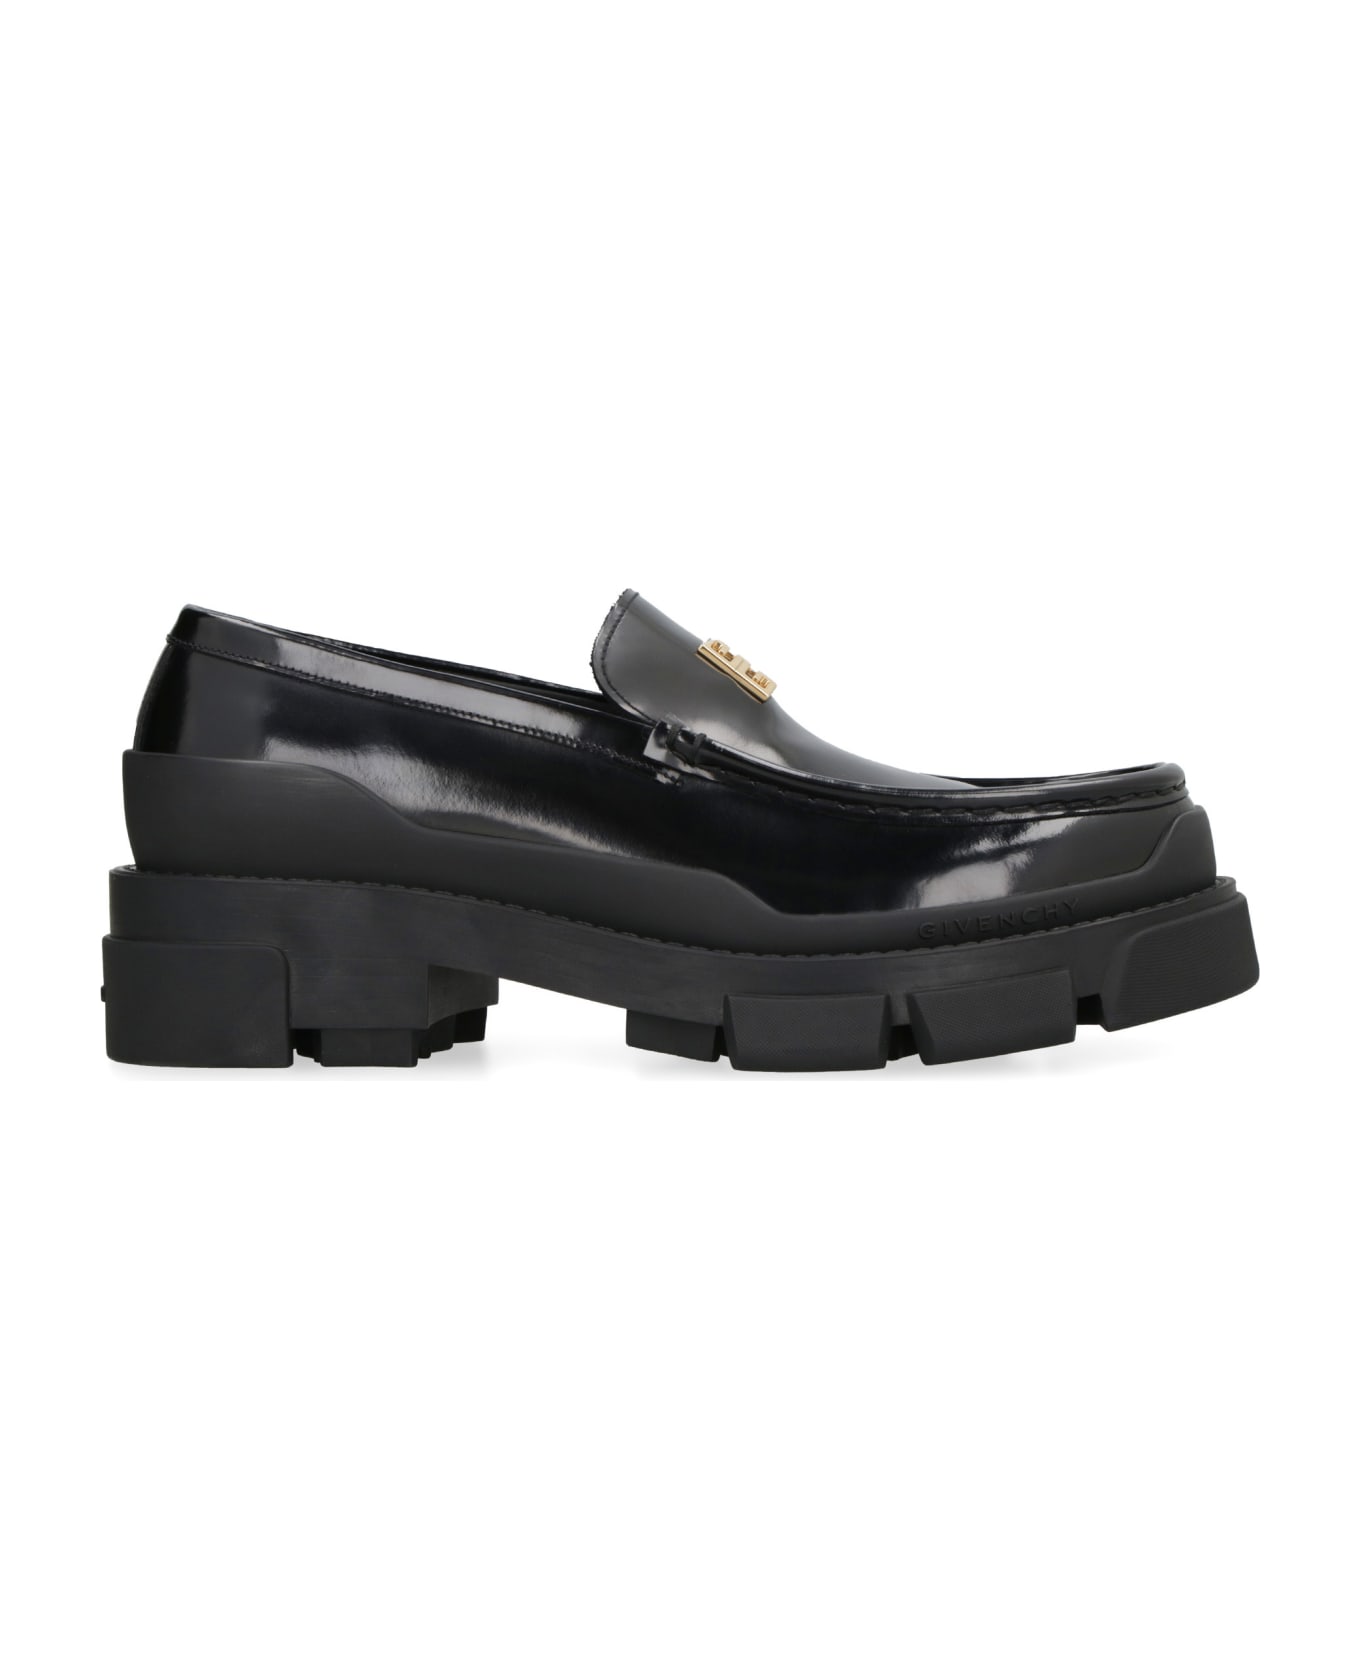 Givenchy Terra Leather Loafers | italist